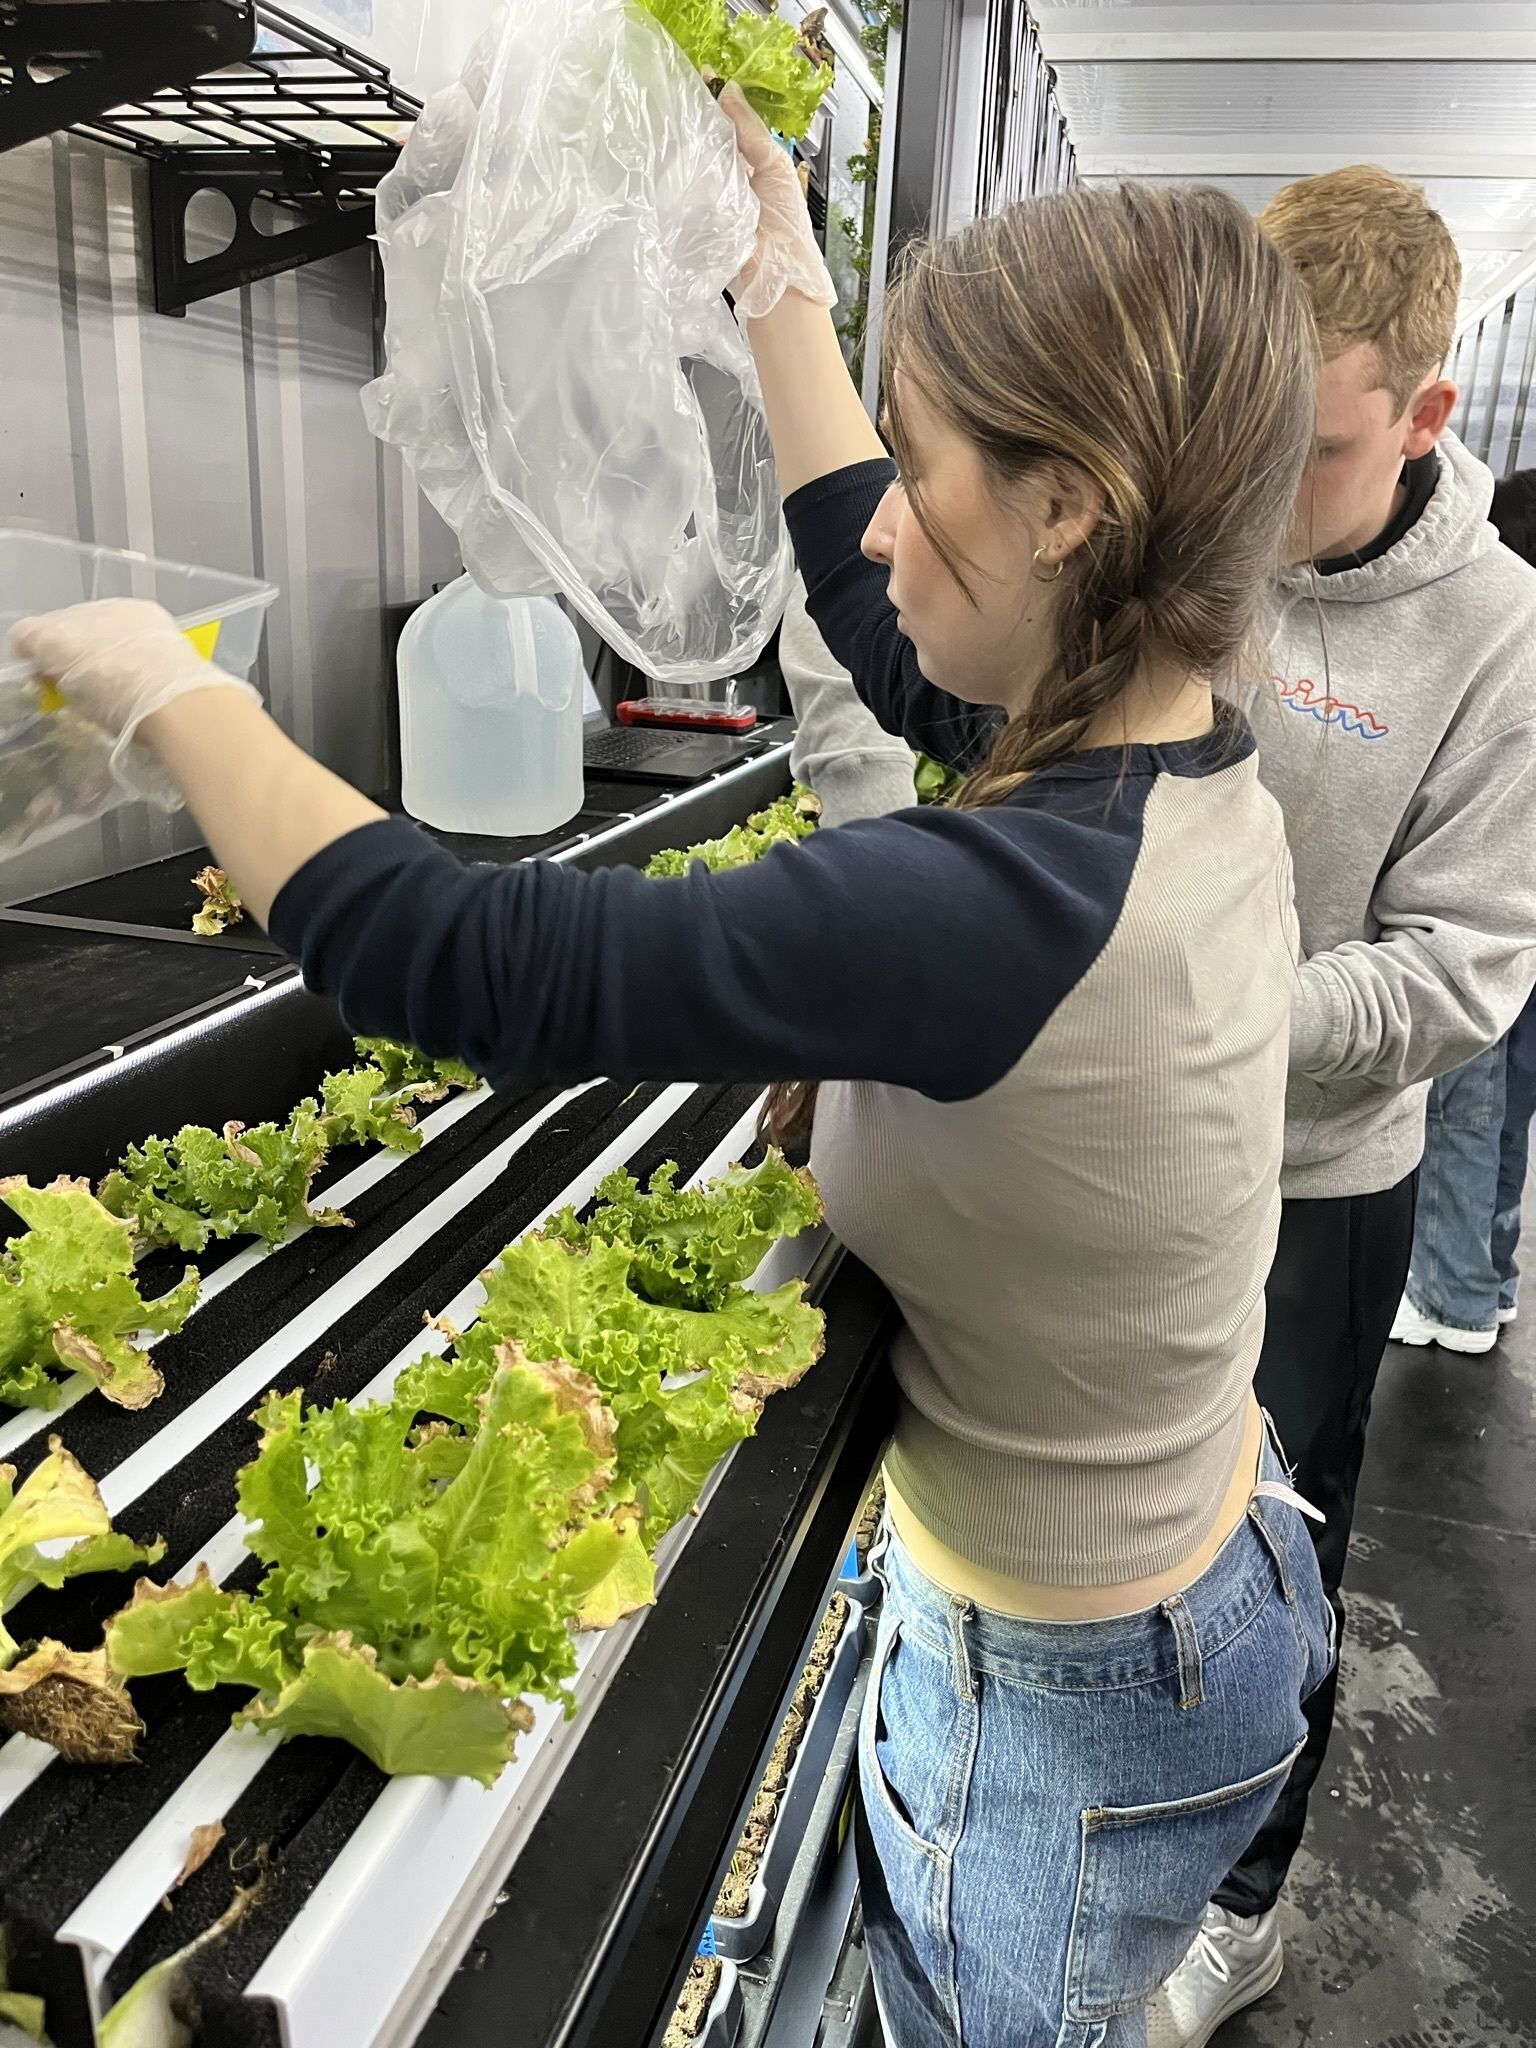 Methacton students learn valuable skills from hydroponic farm